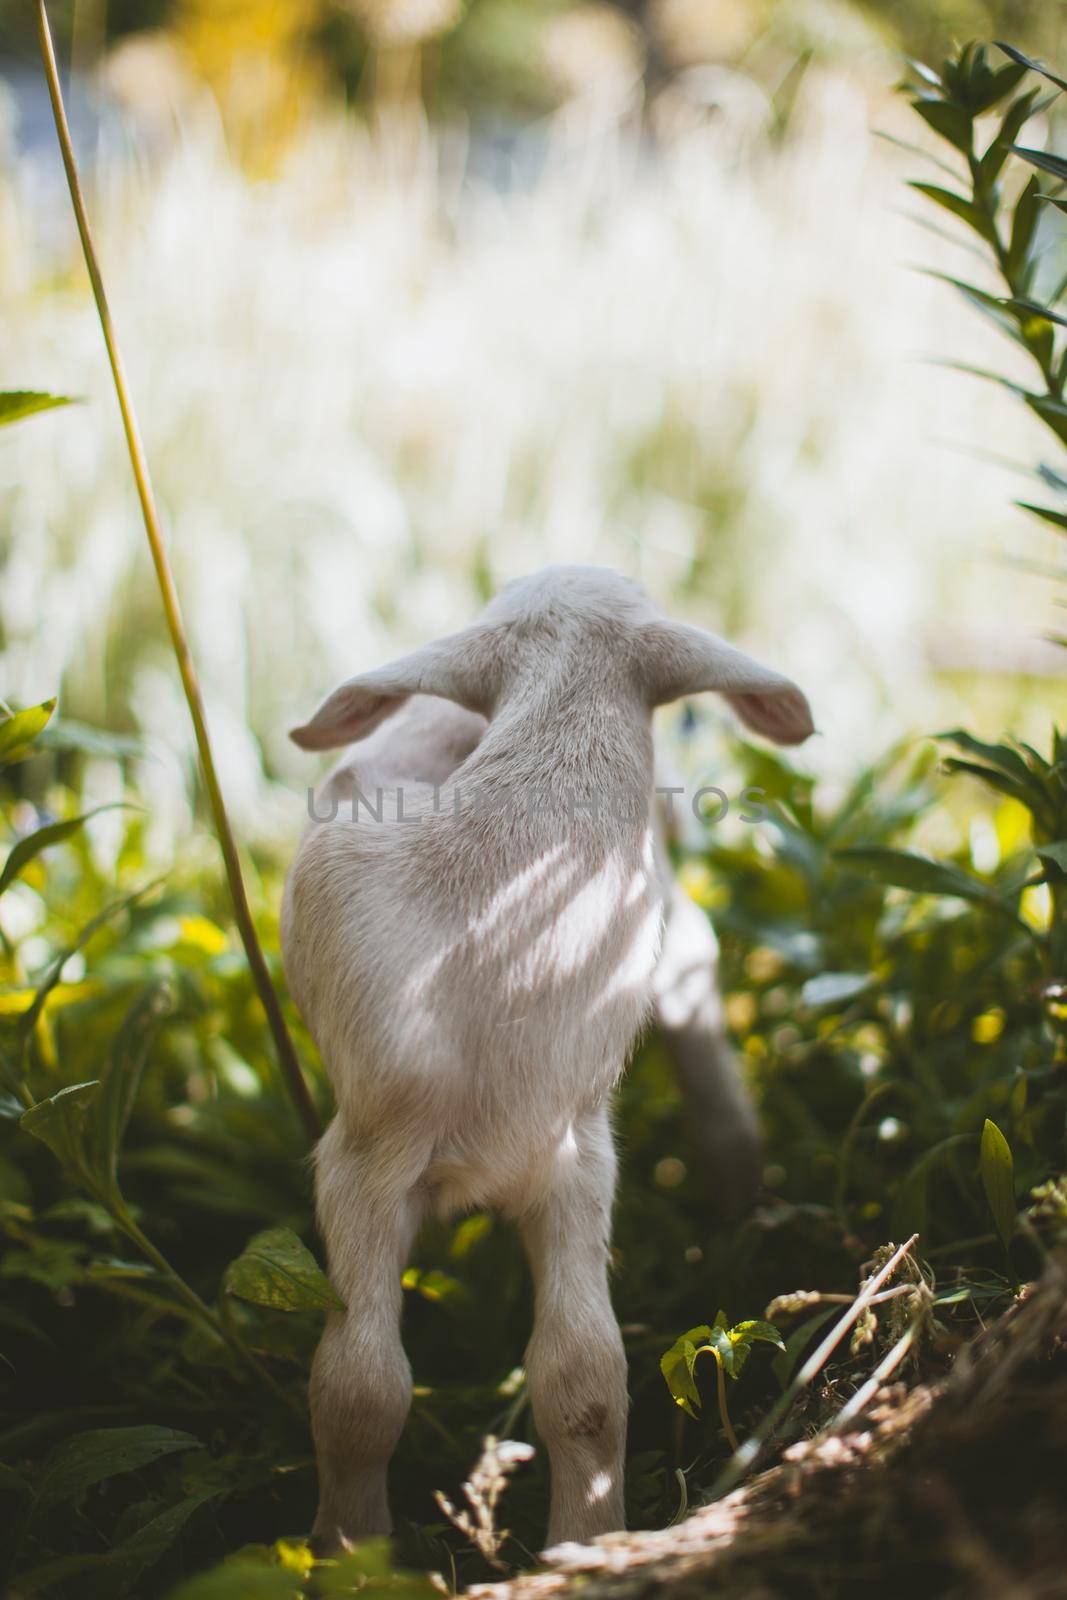 Cute young white goatling standing in a garden